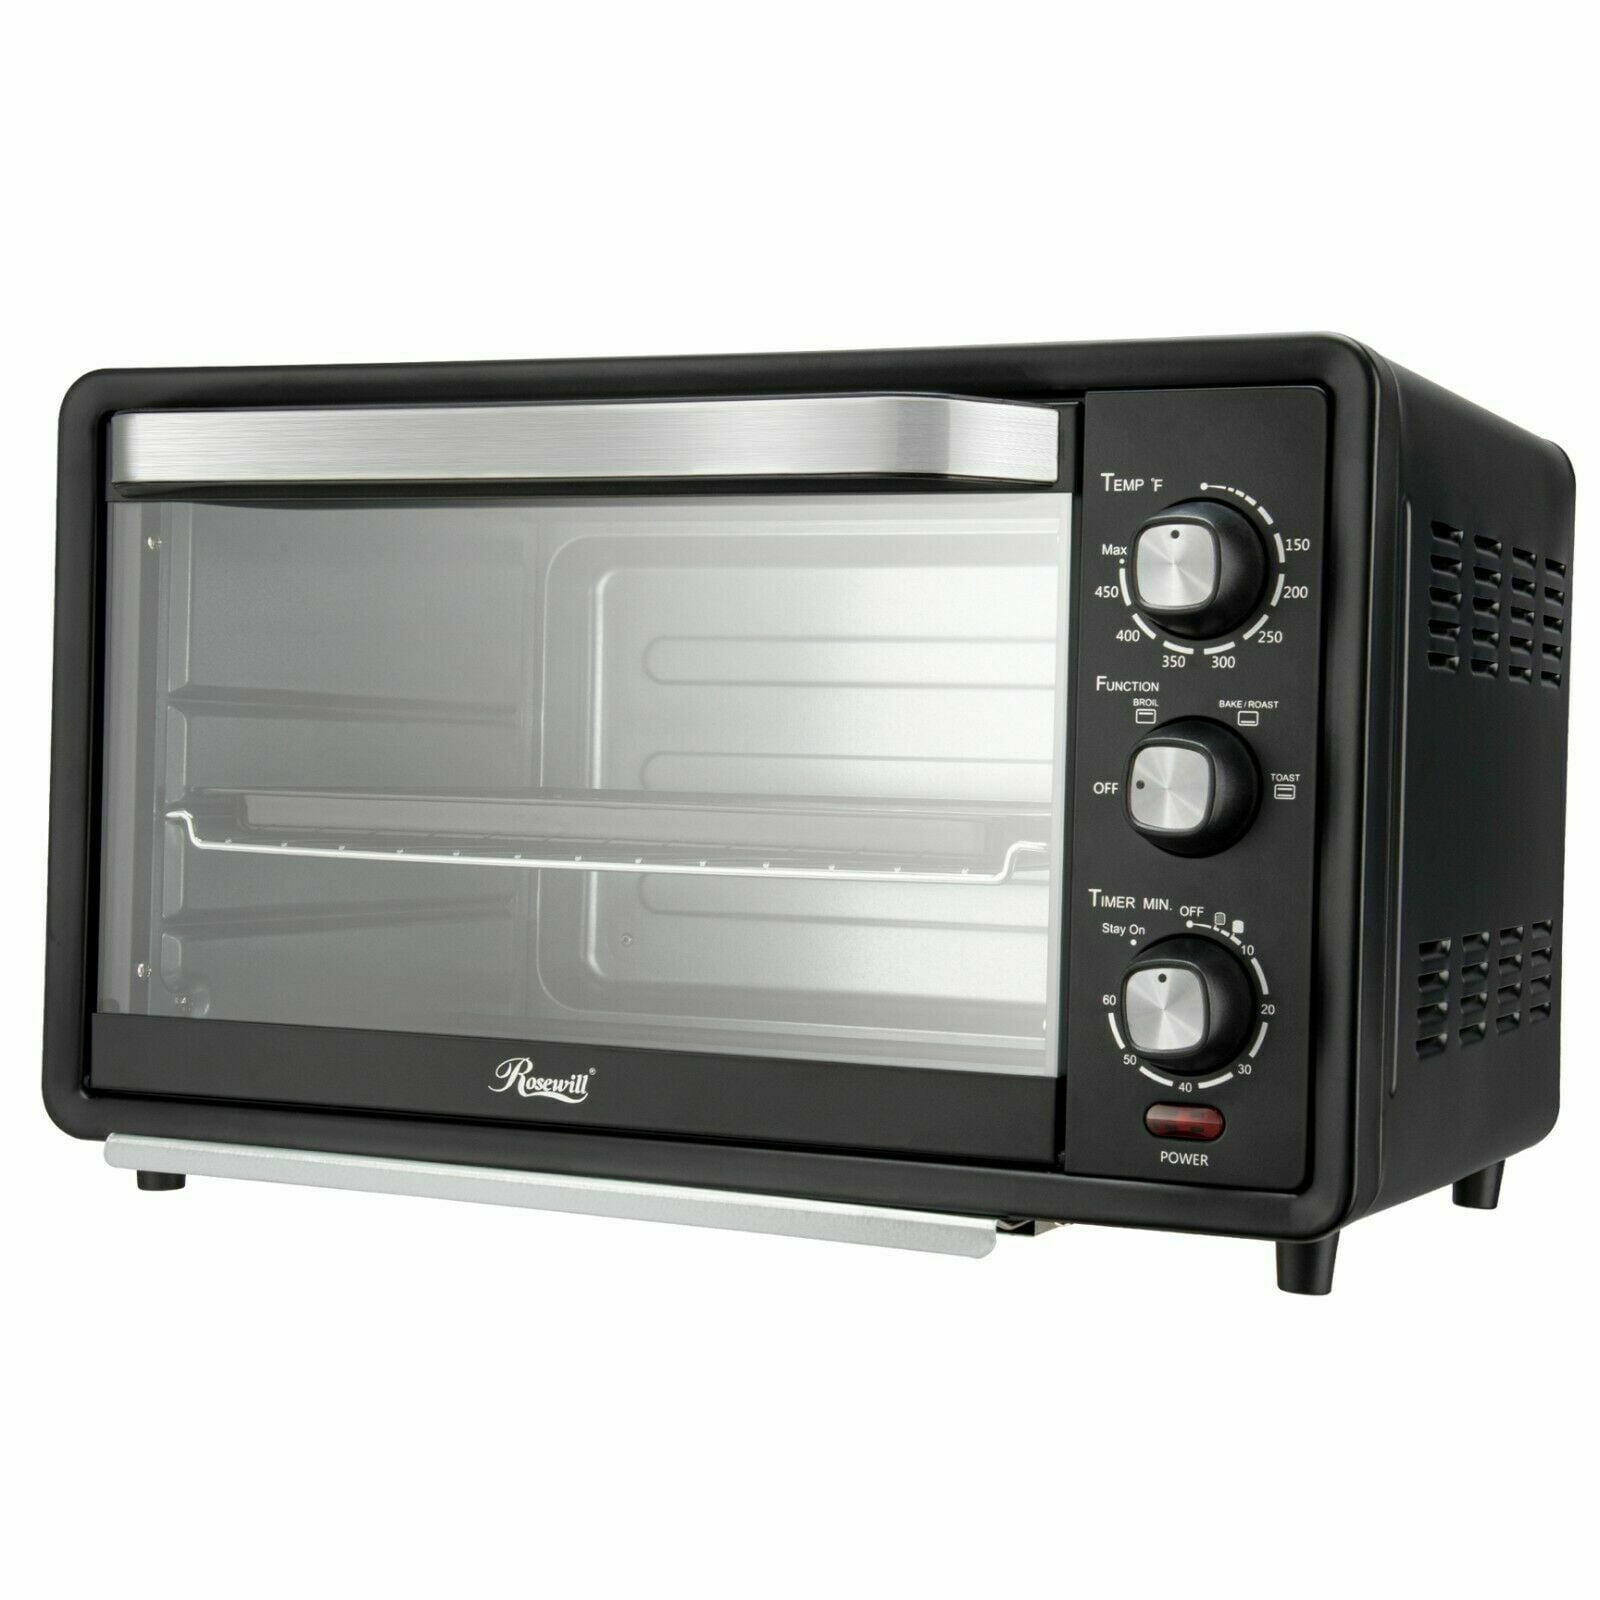 Rosewill 6-Slice Toaster Oven, Stainless Steel Countertop Toaster Oven